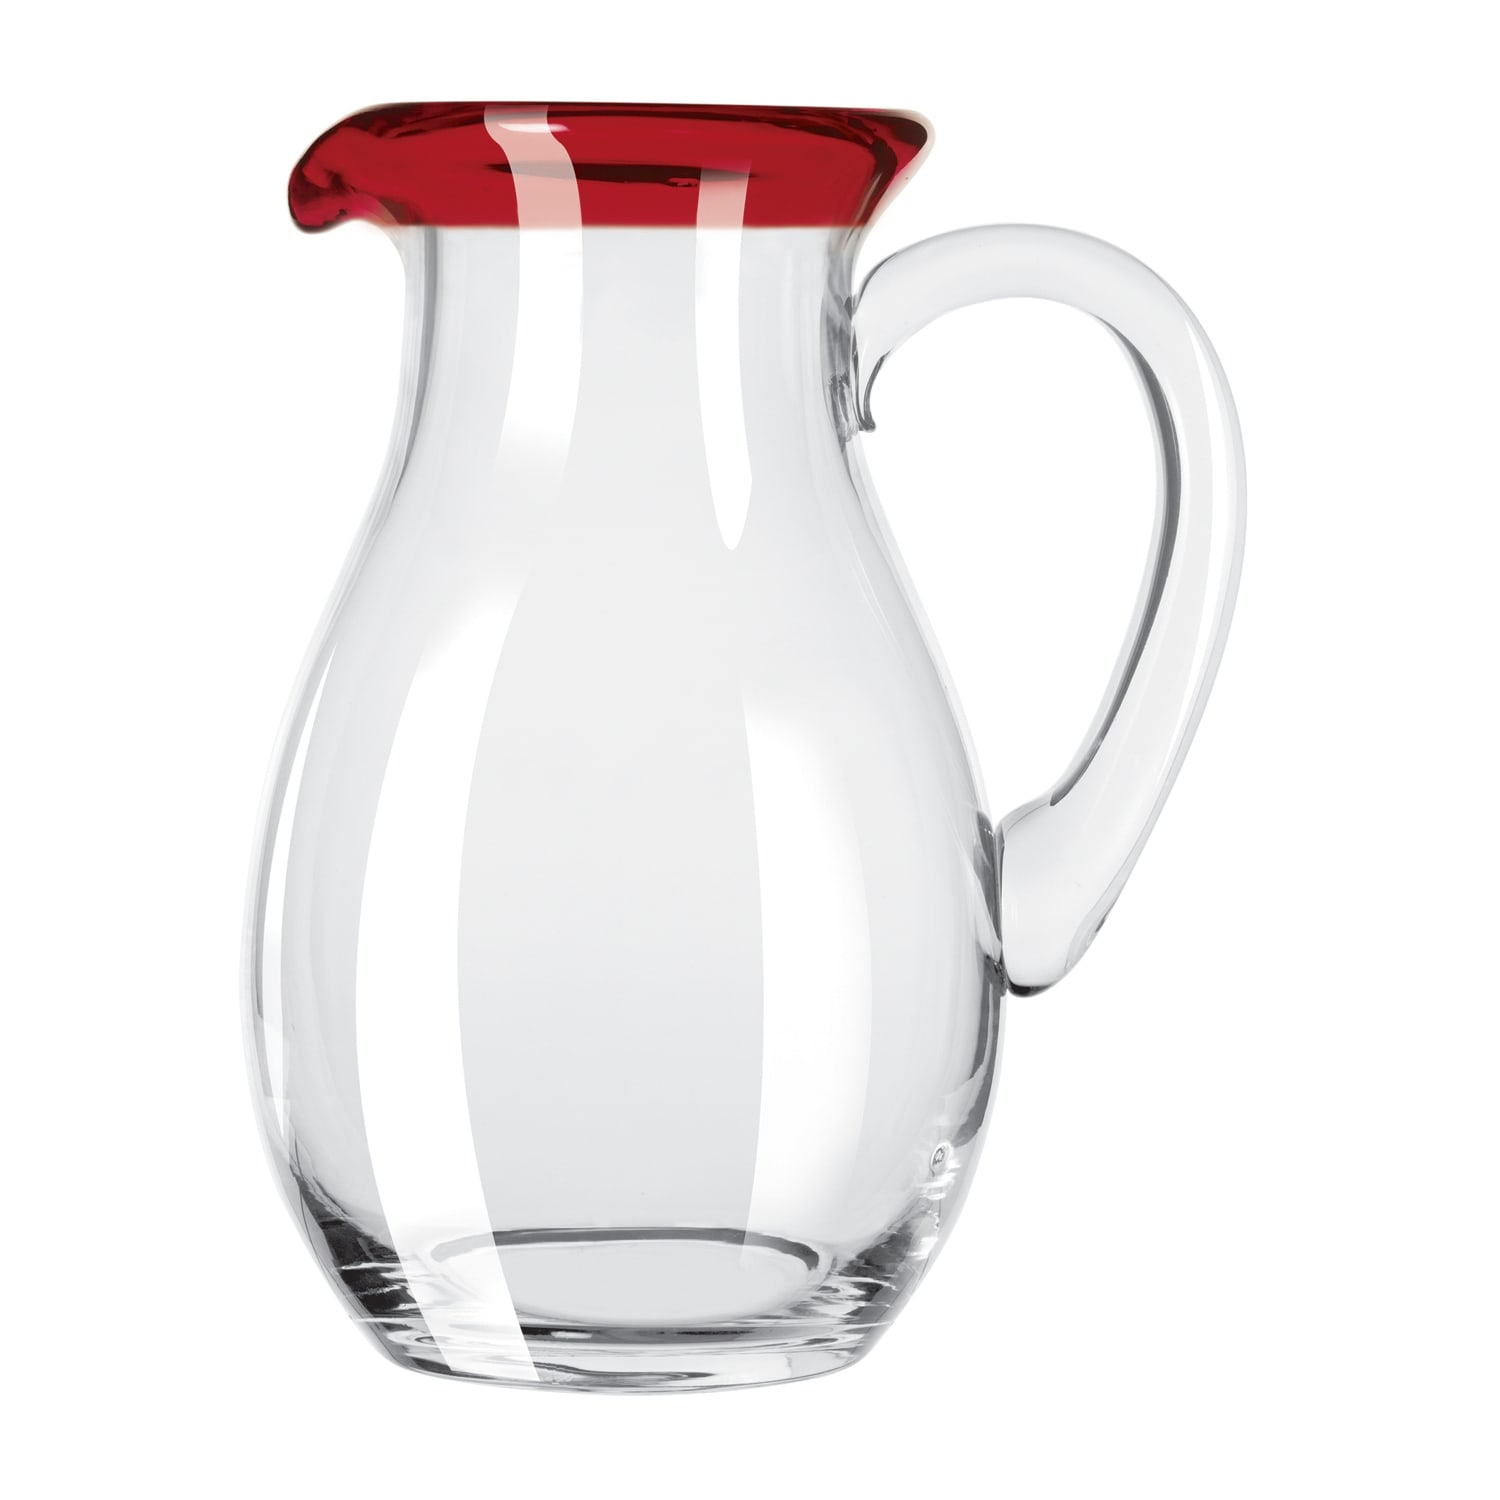 Libbey® 92317R Aruba 56 Ounce Glass Pitcher with Red Rim - 6 / CS